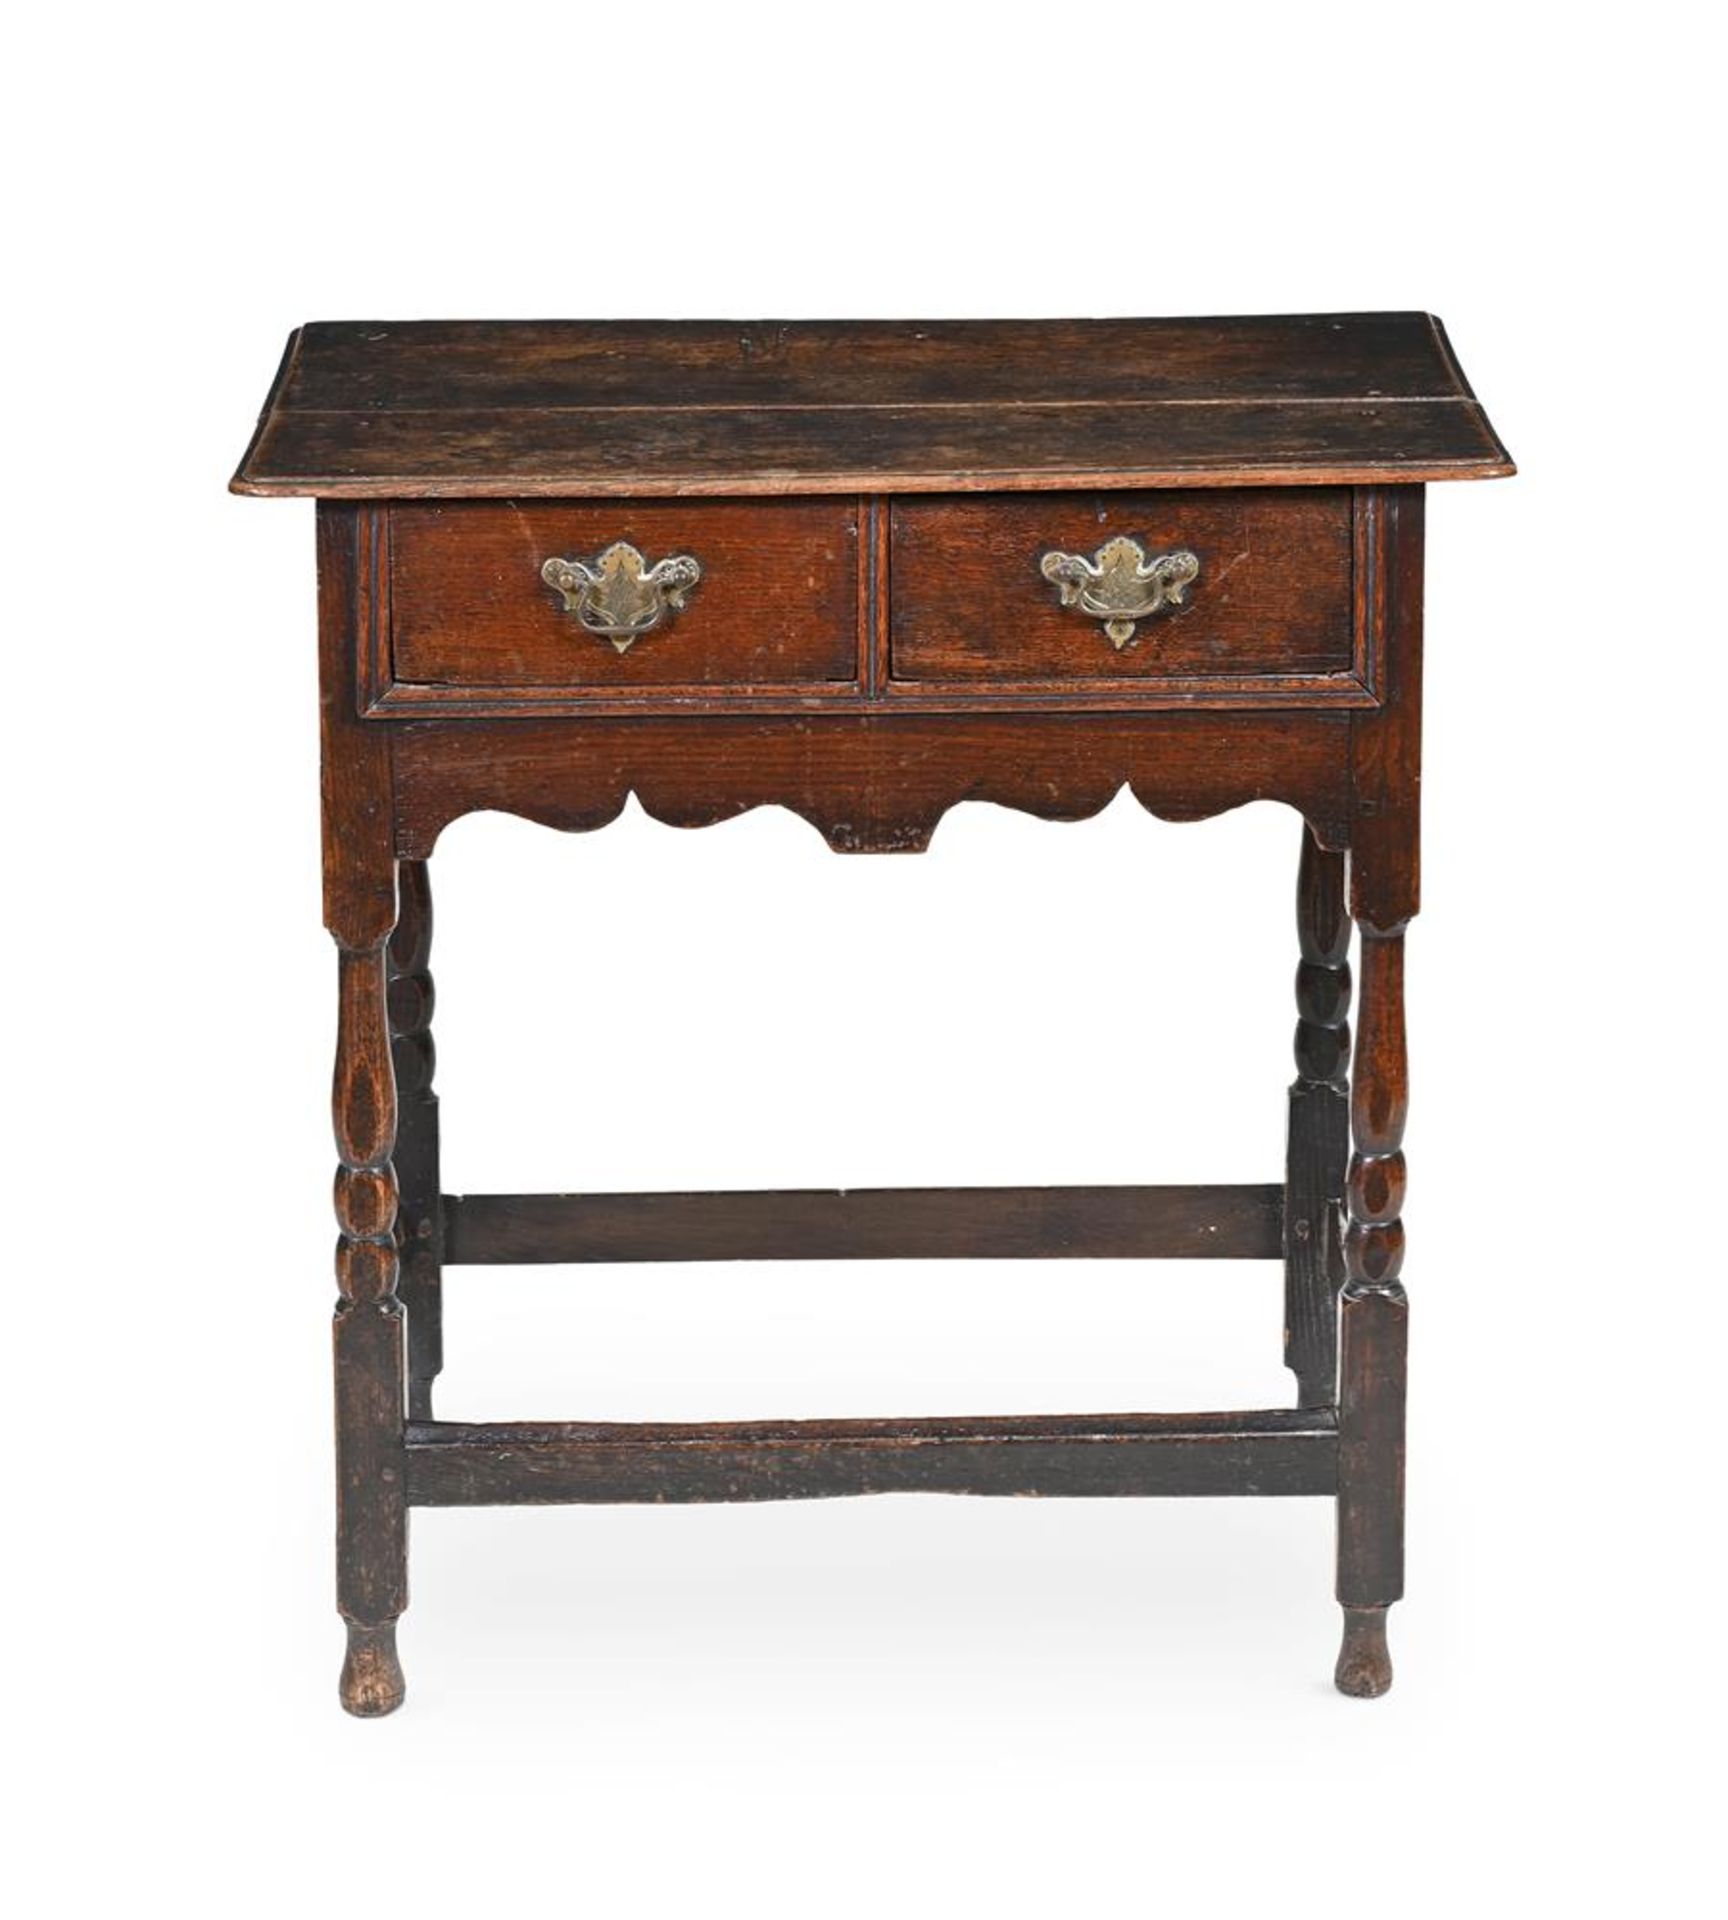 A GEORGE I OAK SIDE TABLE, EARLY 18TH CENTURY